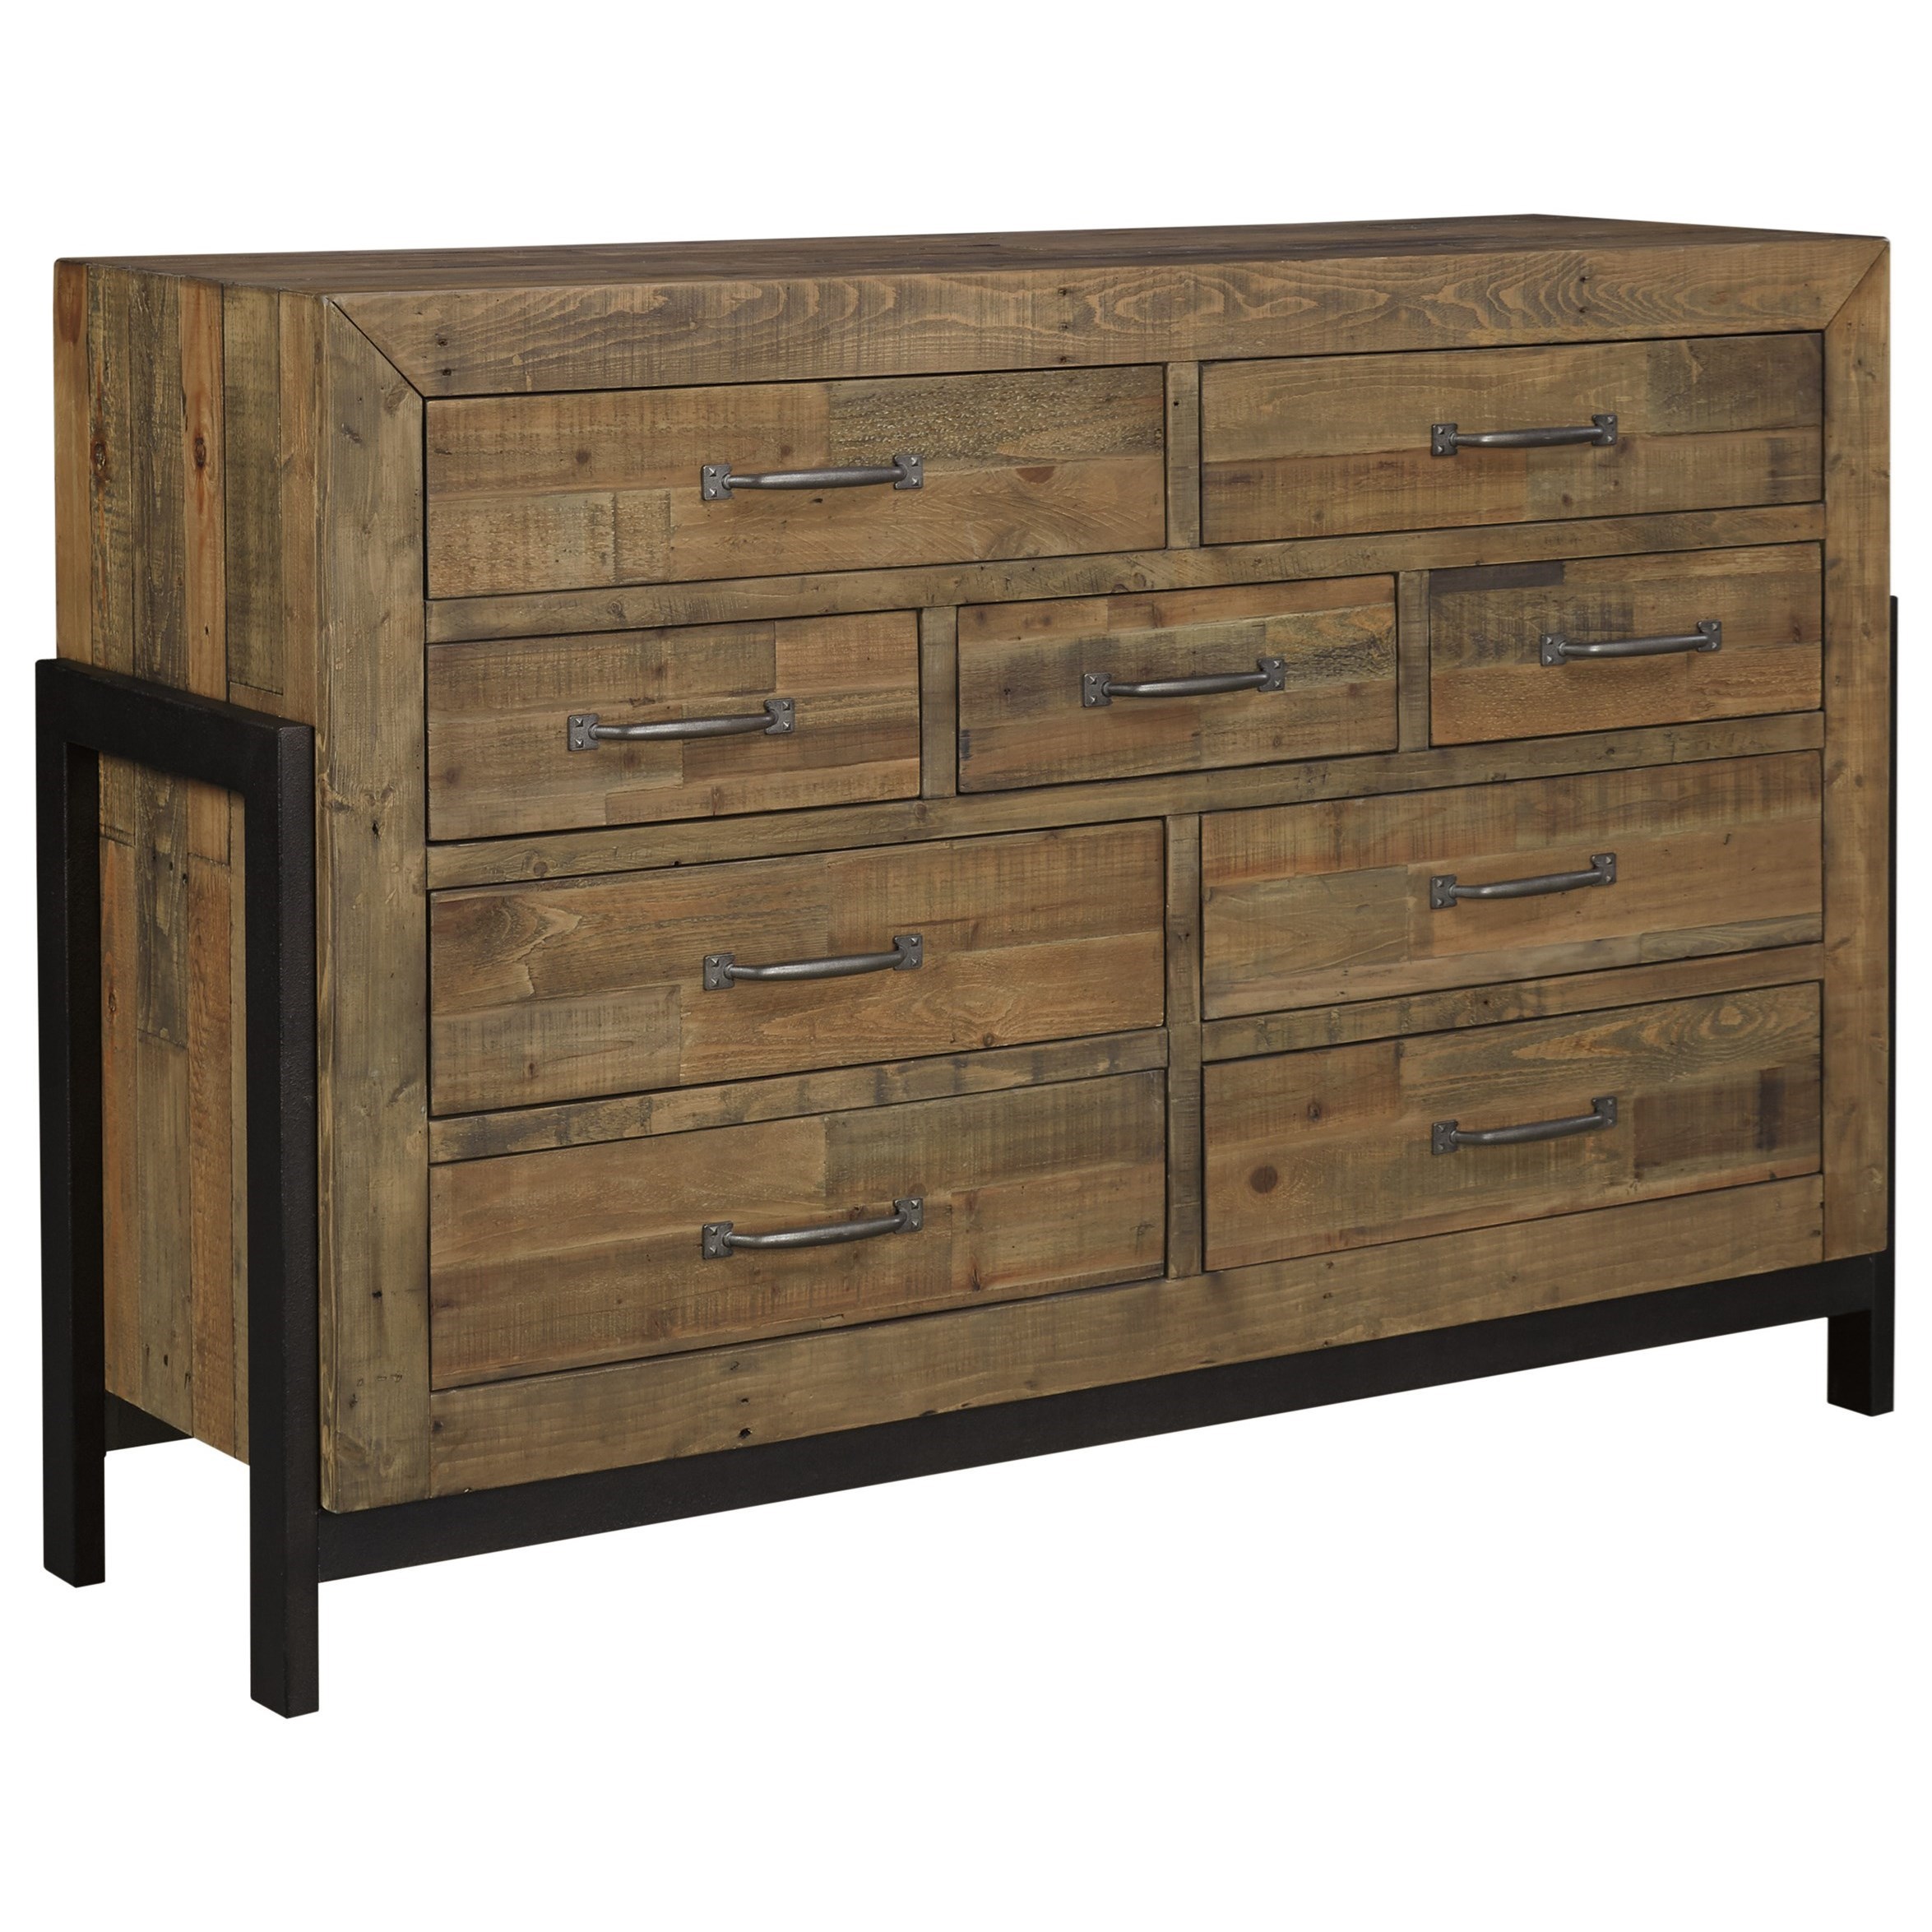 Signature Design by Ashley Sommerford Reclaimed Pine Solid Wood